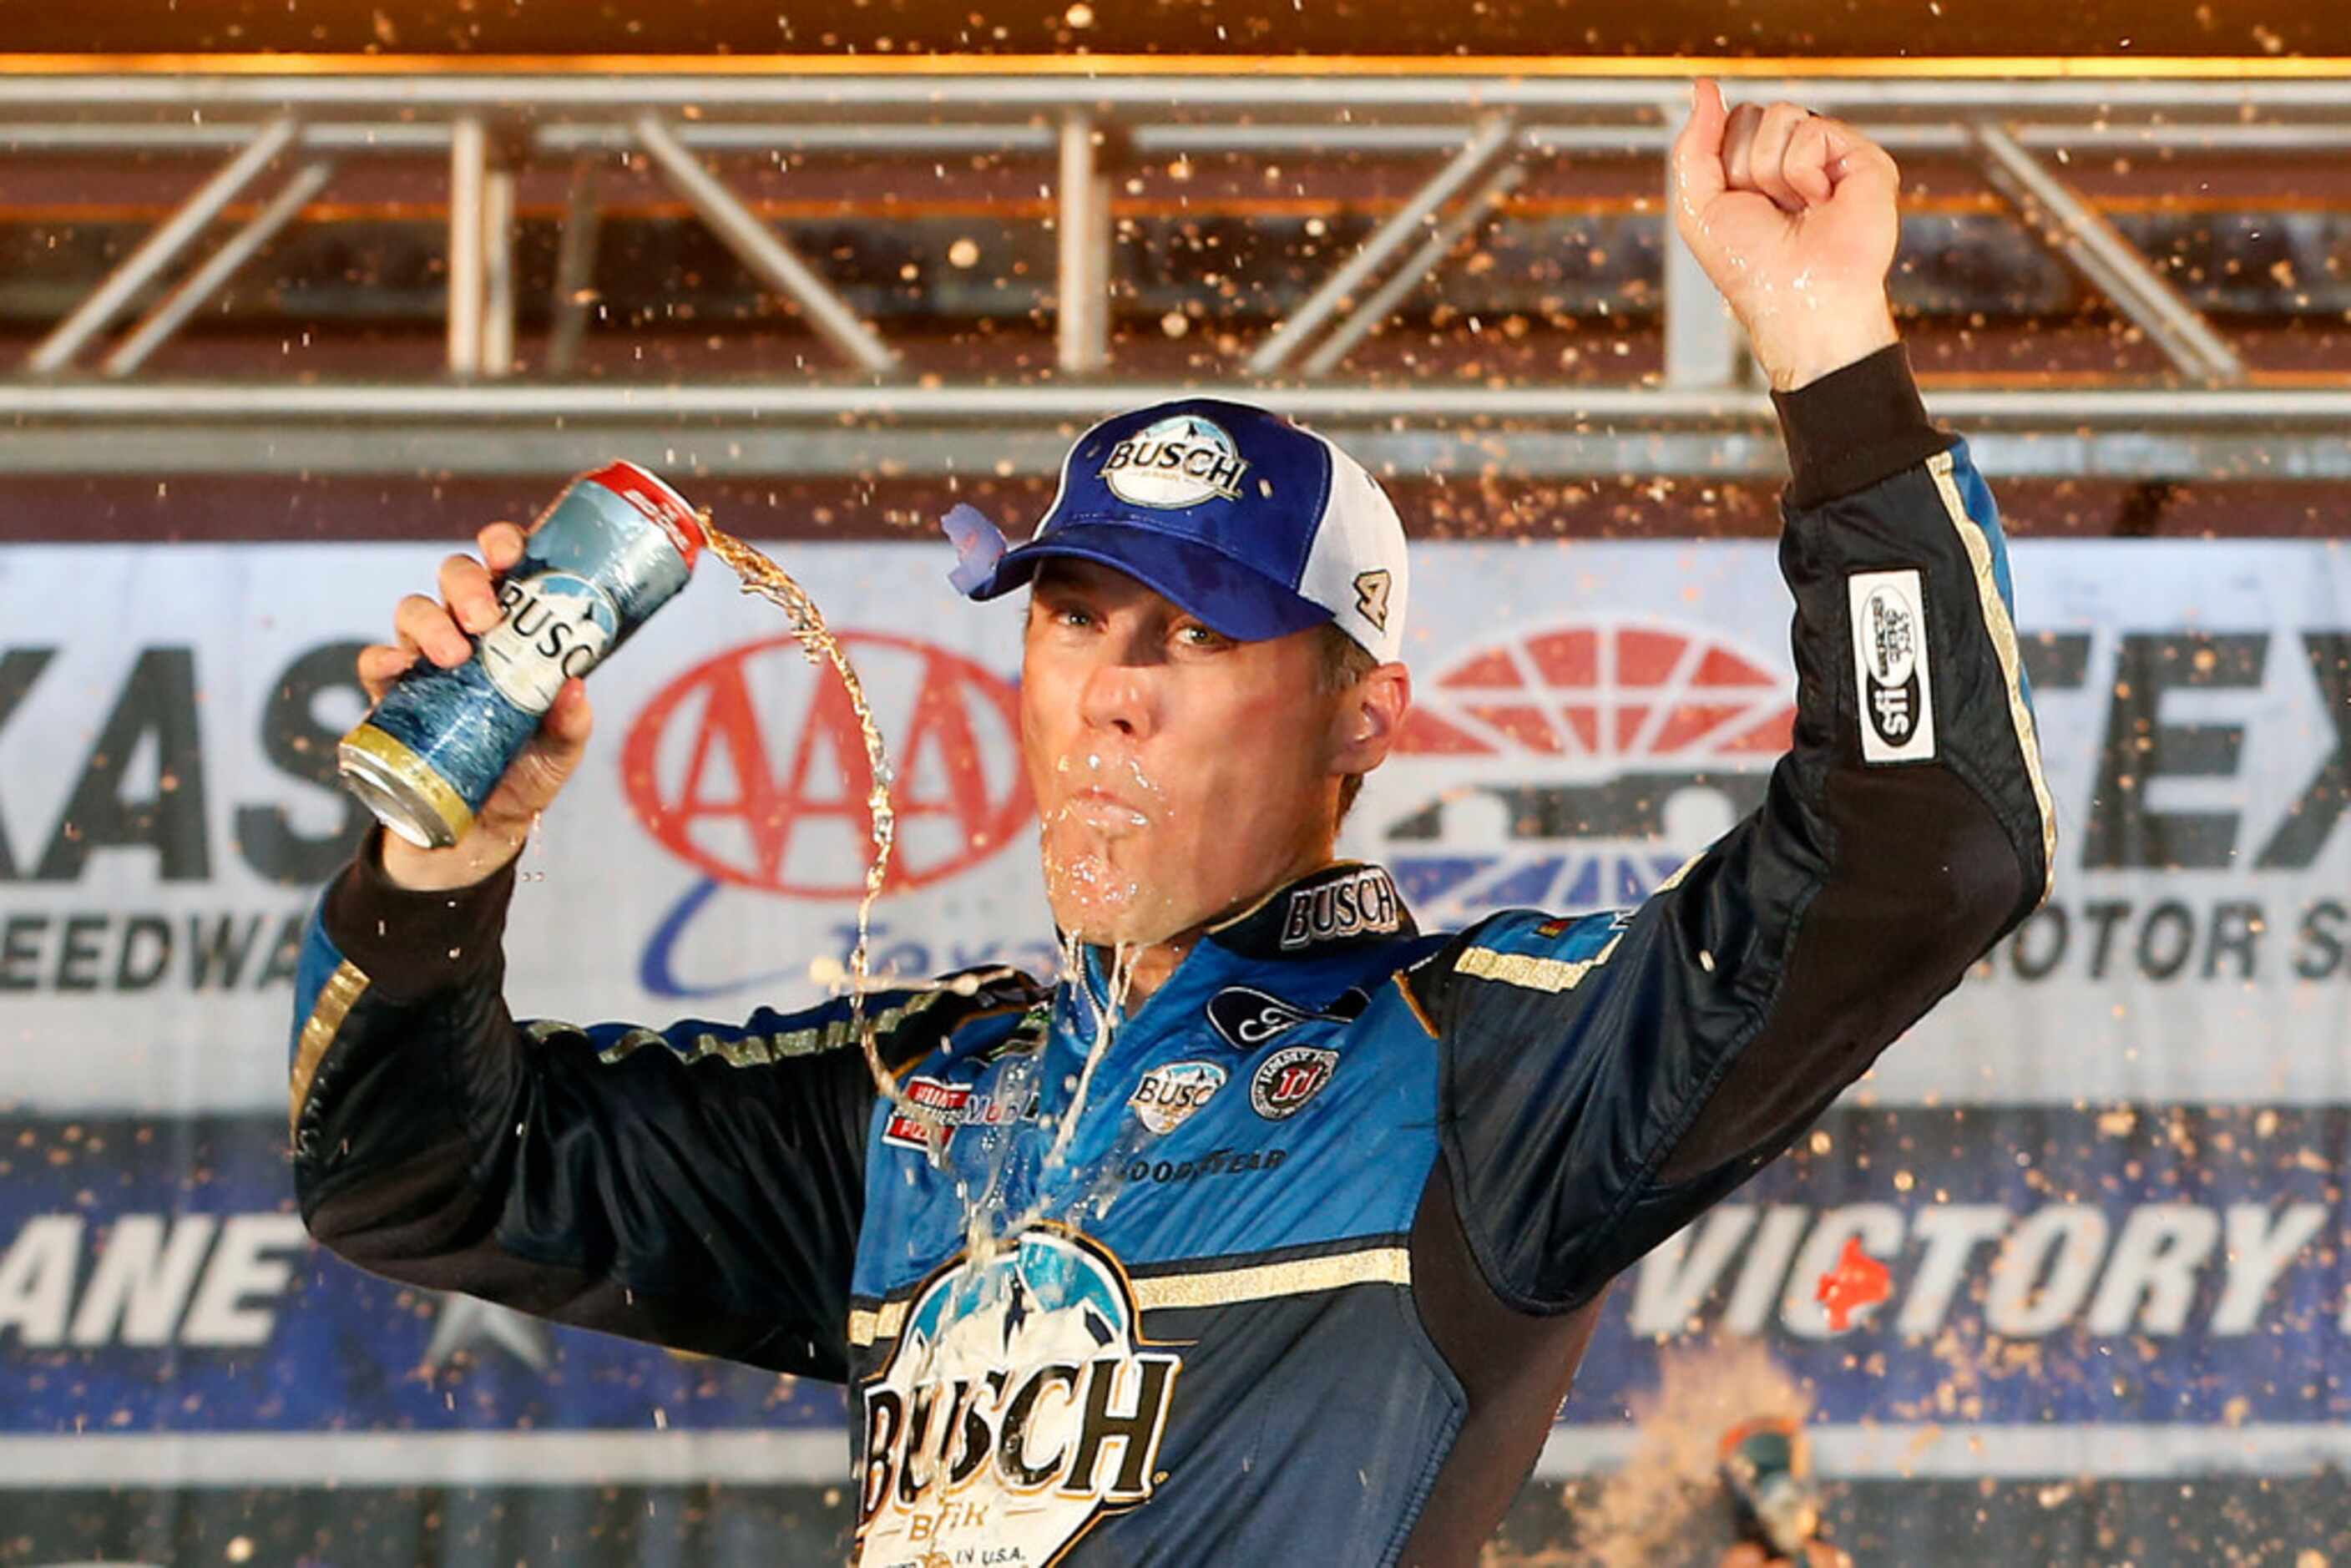 FORT WORTH, TEXAS - NOVEMBER 03: Kevin Harvick, driver of the #4 Busch Beer/Ducks Unlimited...